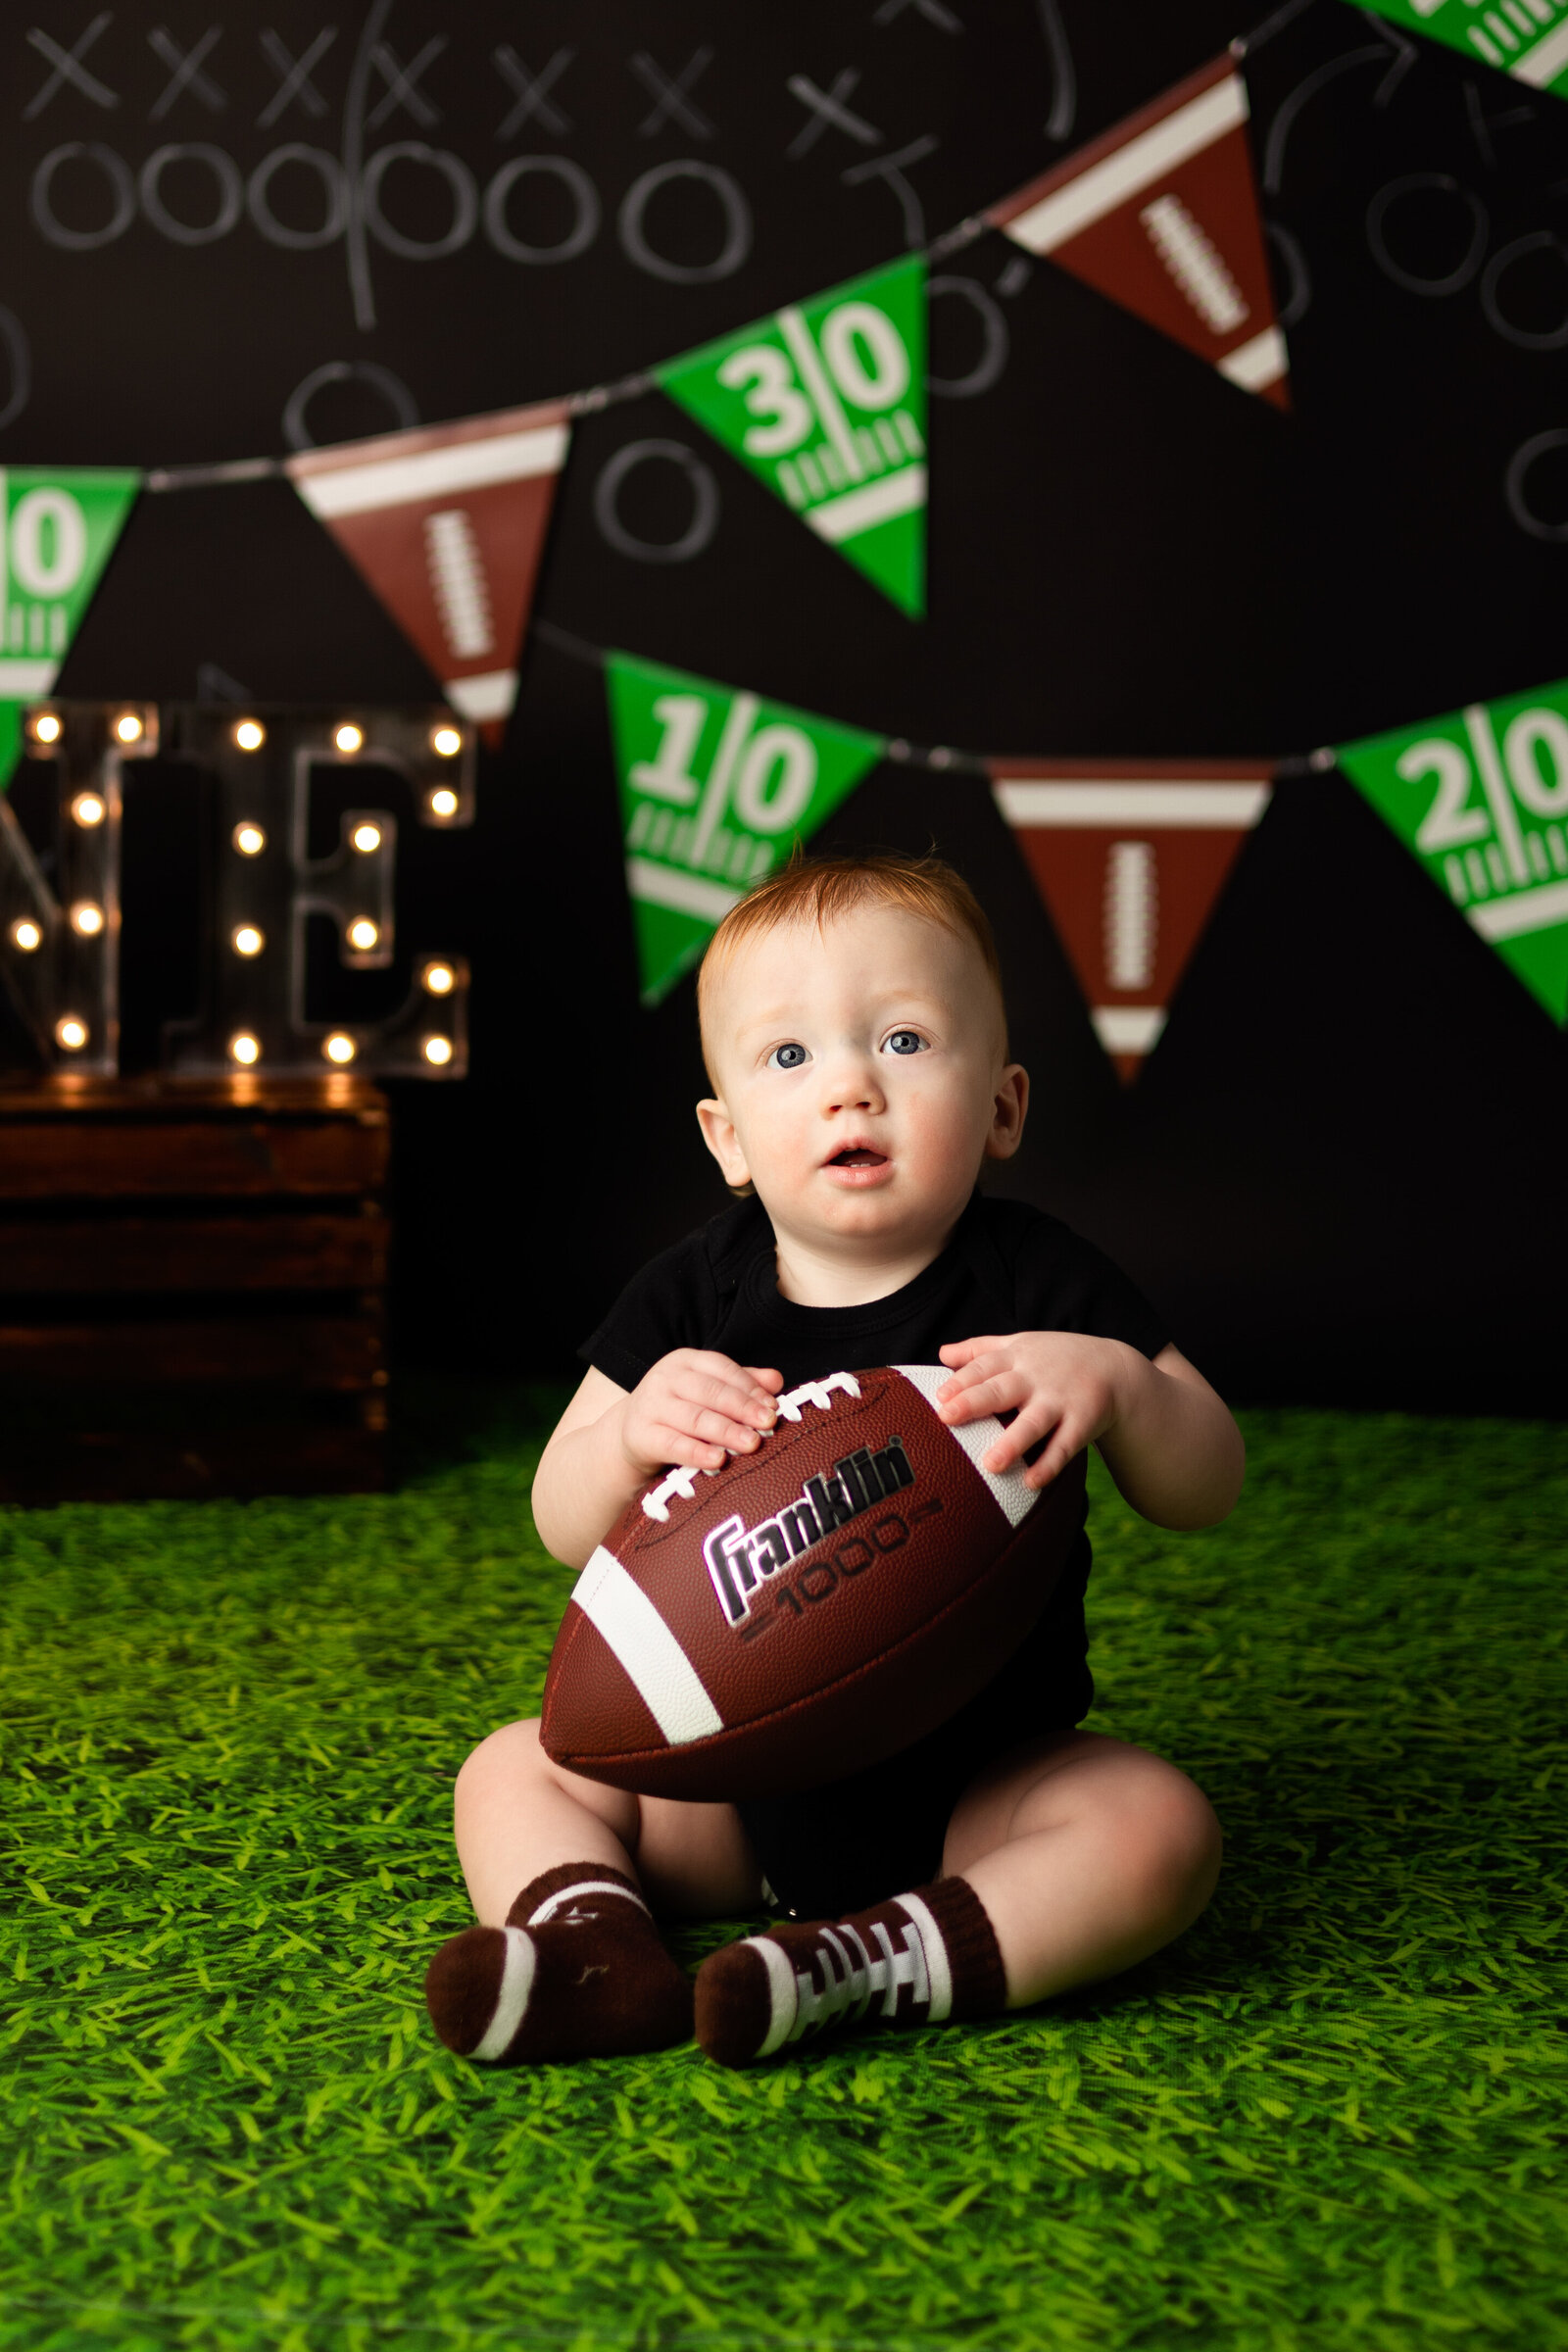 Adorable baby boy holding a foot ball, sits contently